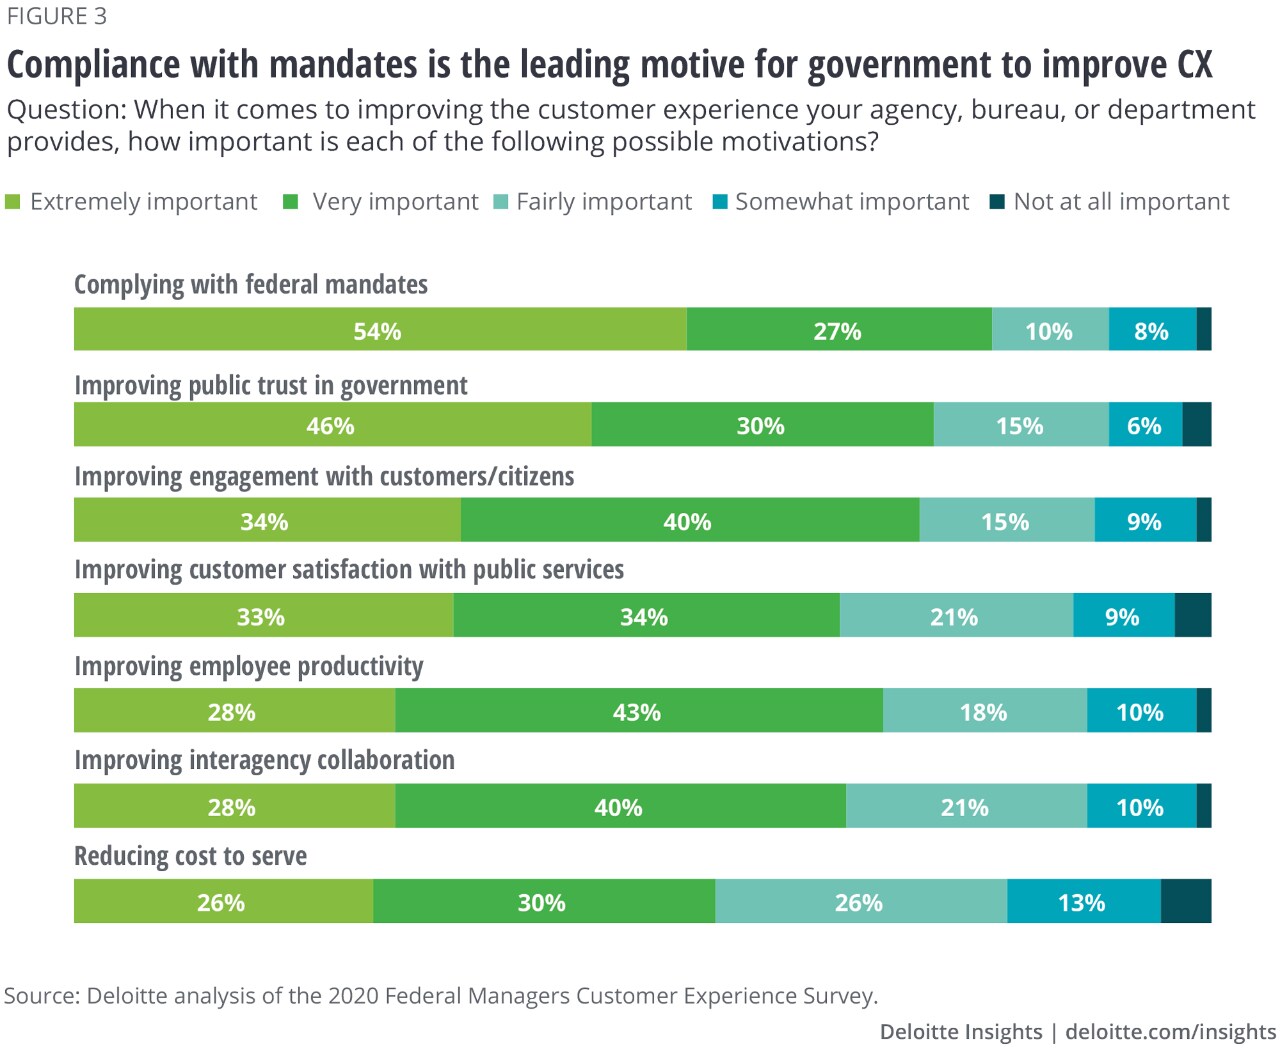 Figure 3. Compliance with mandates is the leading motive for government to improve CX